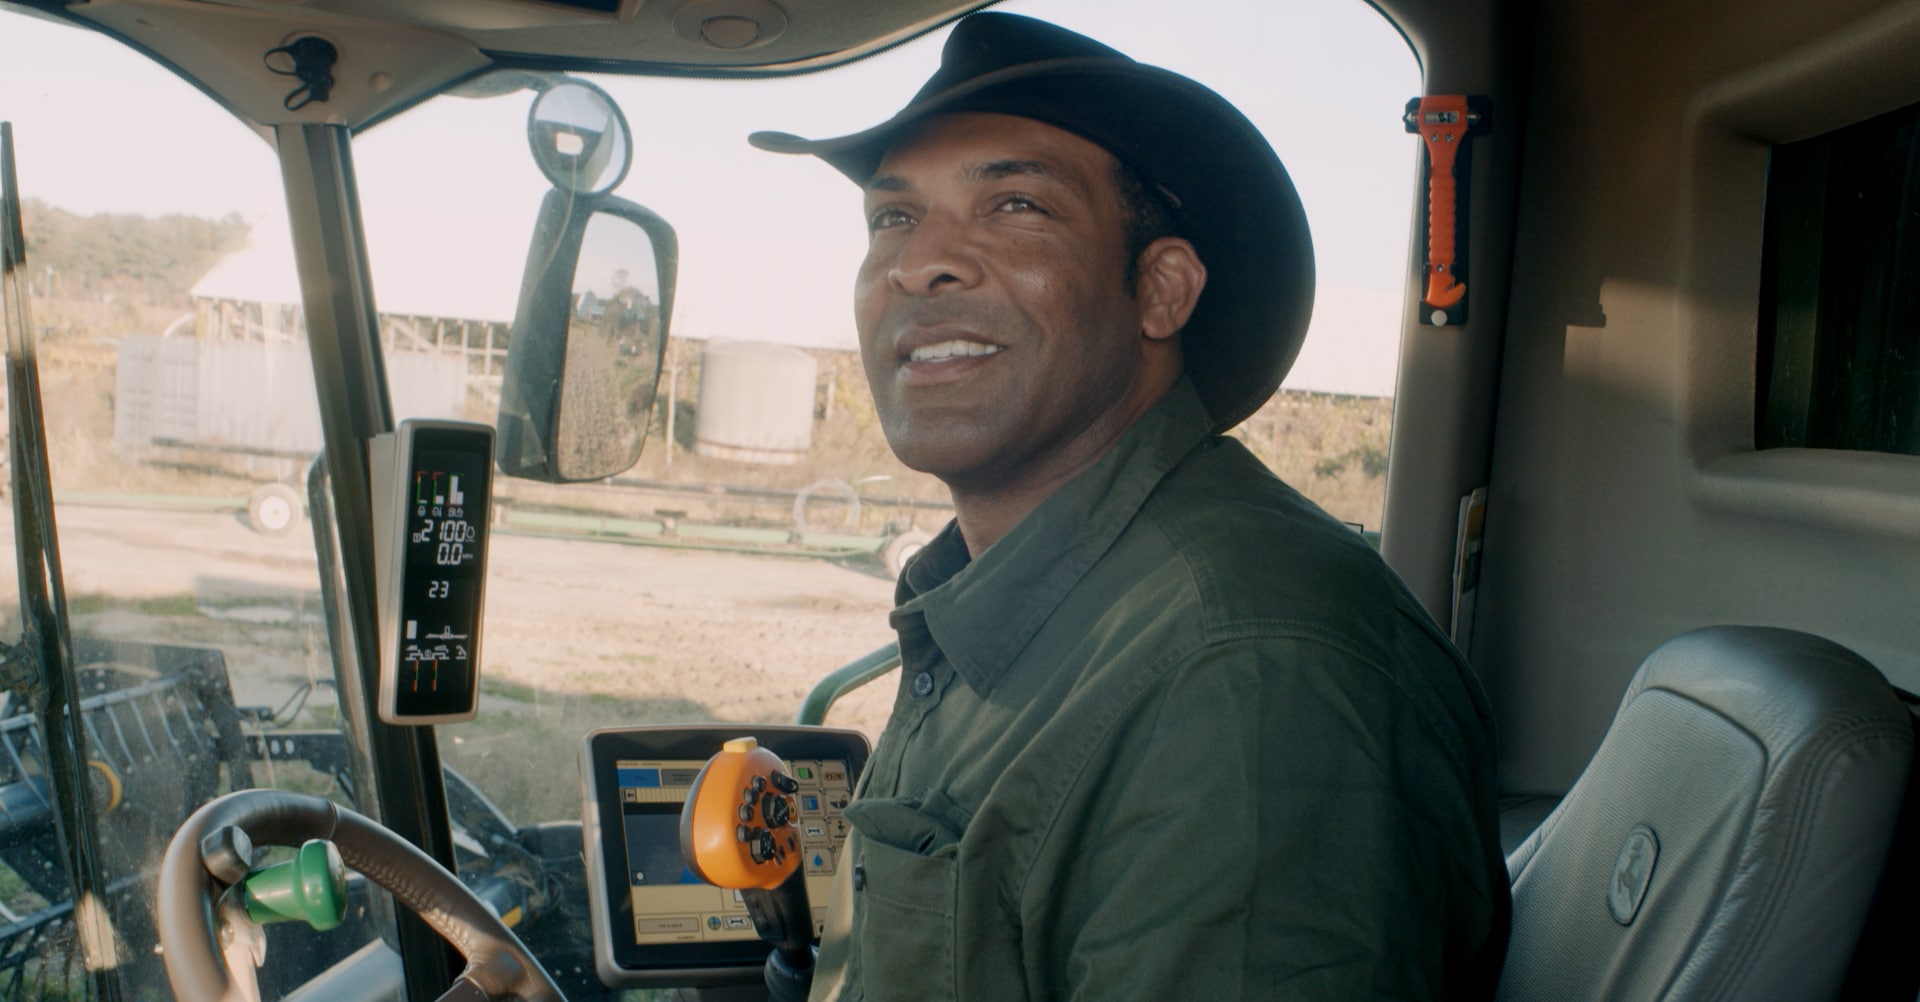 A picture of P.J. Haynie in the cab of a tractor.